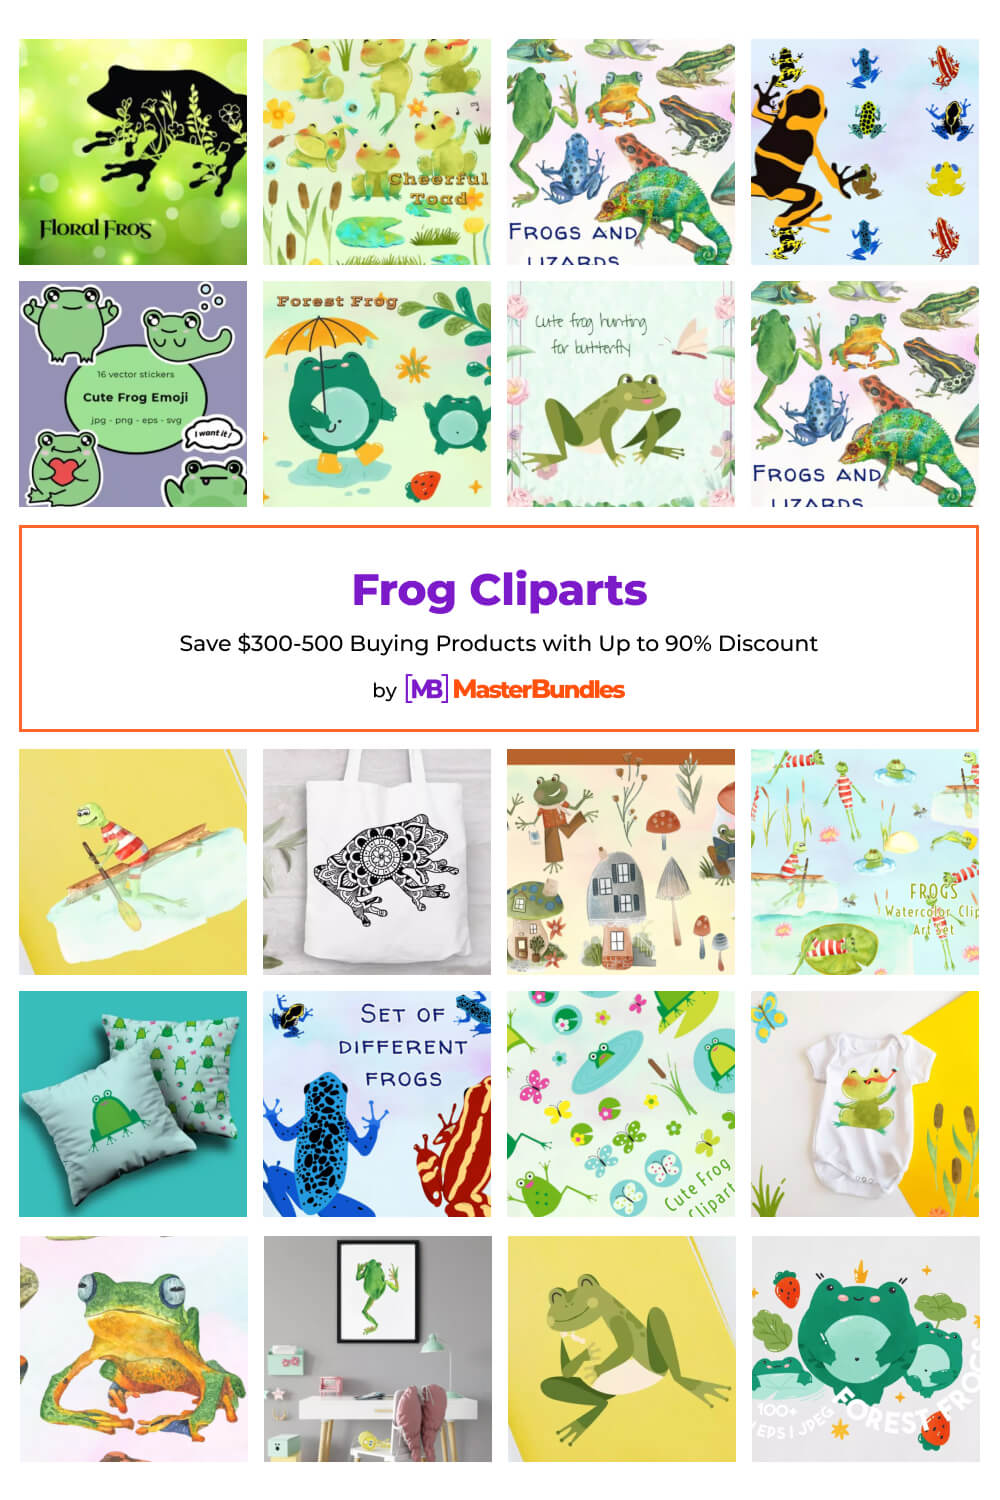 frog cliparts pinterest image.